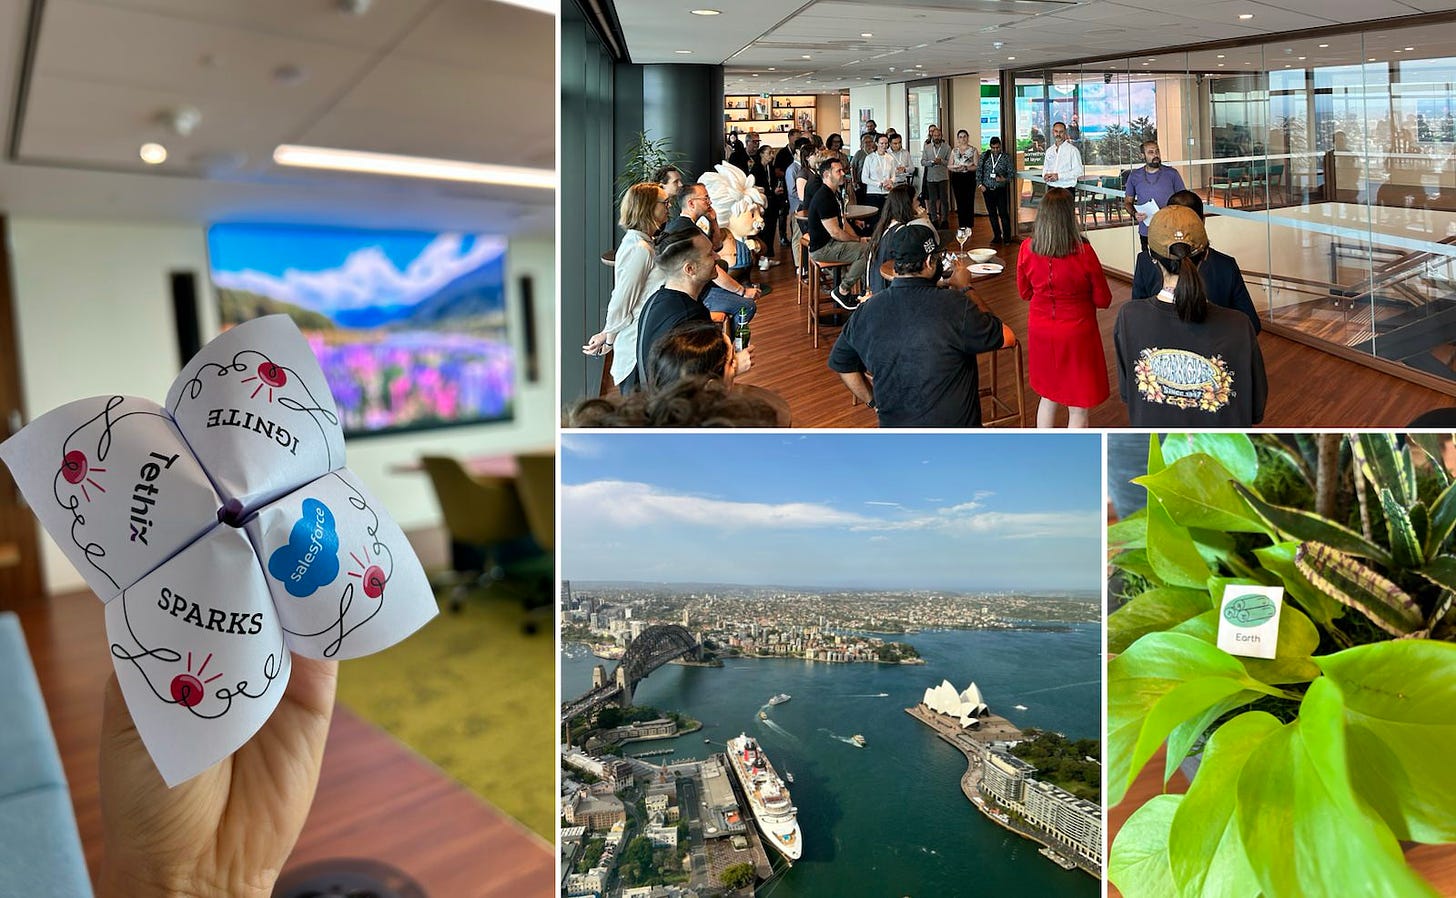 Collage of event photos showing a hand holding a paper spark, a group of participants gathered in Salesforce tower, the view from the tower, and an earth-themed display with plants.